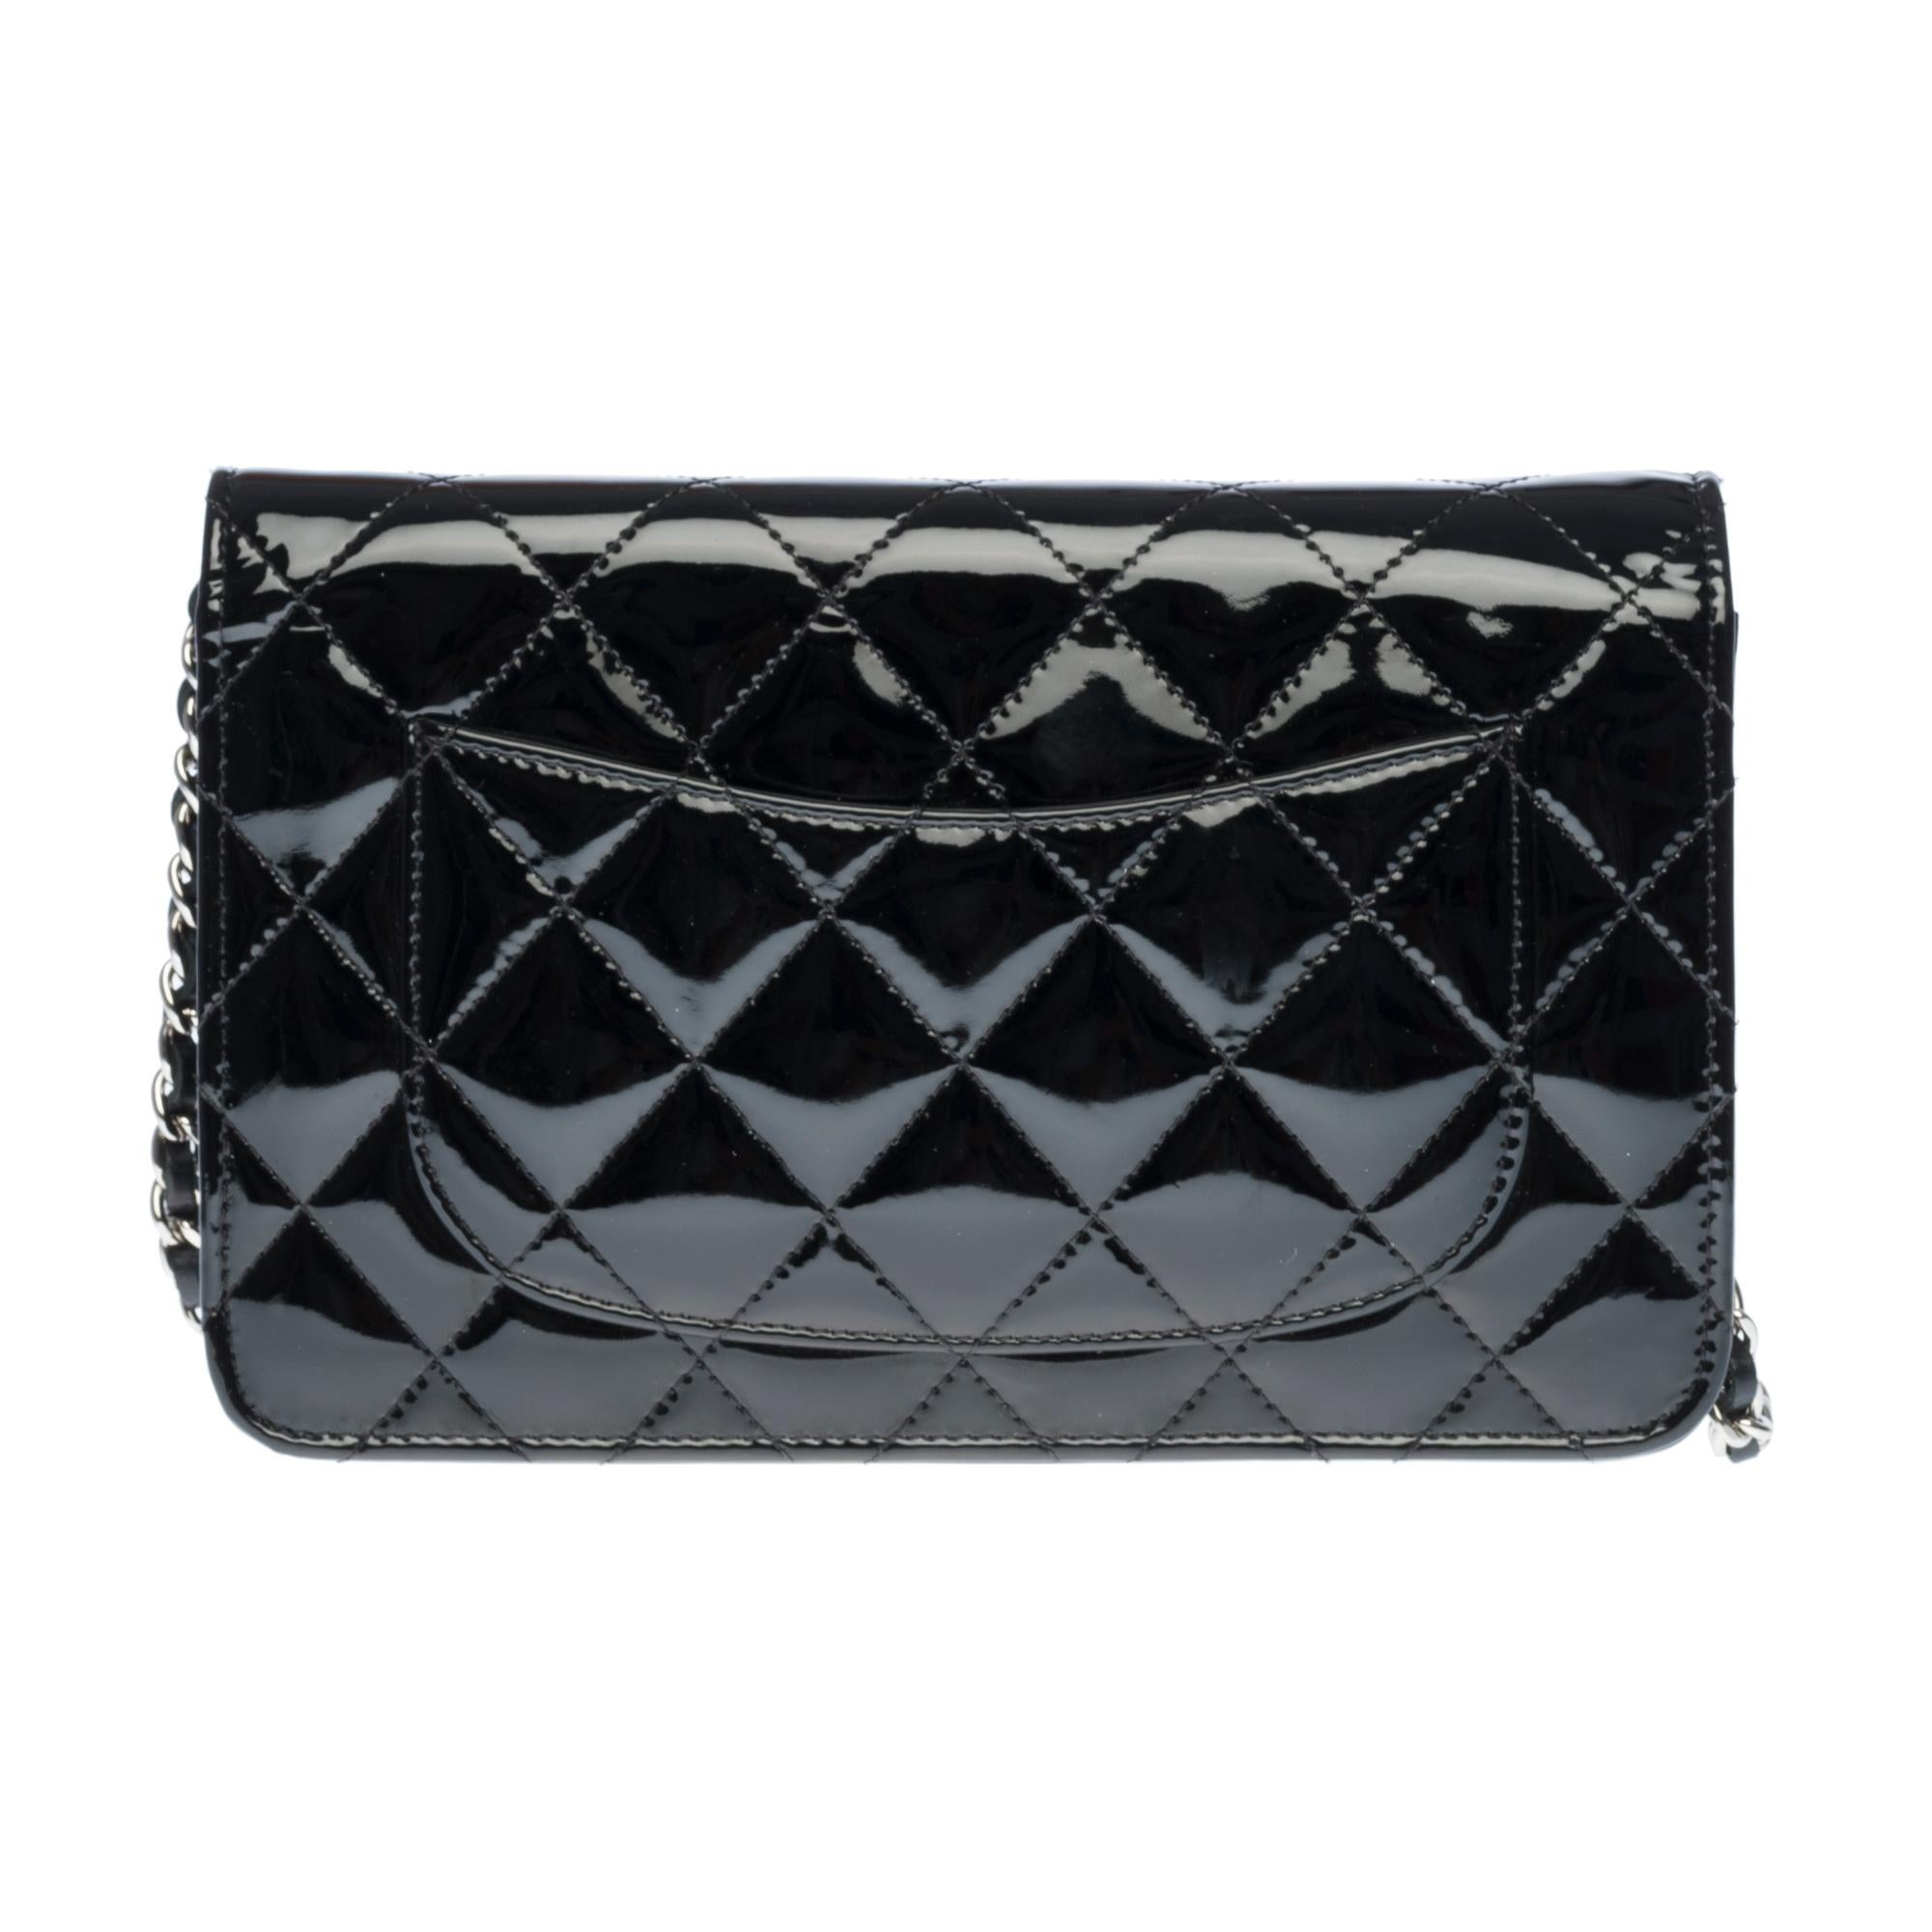 Lovely Chanel Wallet on Chain (WOC) shoulder bag in black quilted patent leather, silver metal trim, a silver metal chain handle intertwined with black leather allowing a shoulder or shoulder strap.

Closure by flap.
Black leather lining, one zip